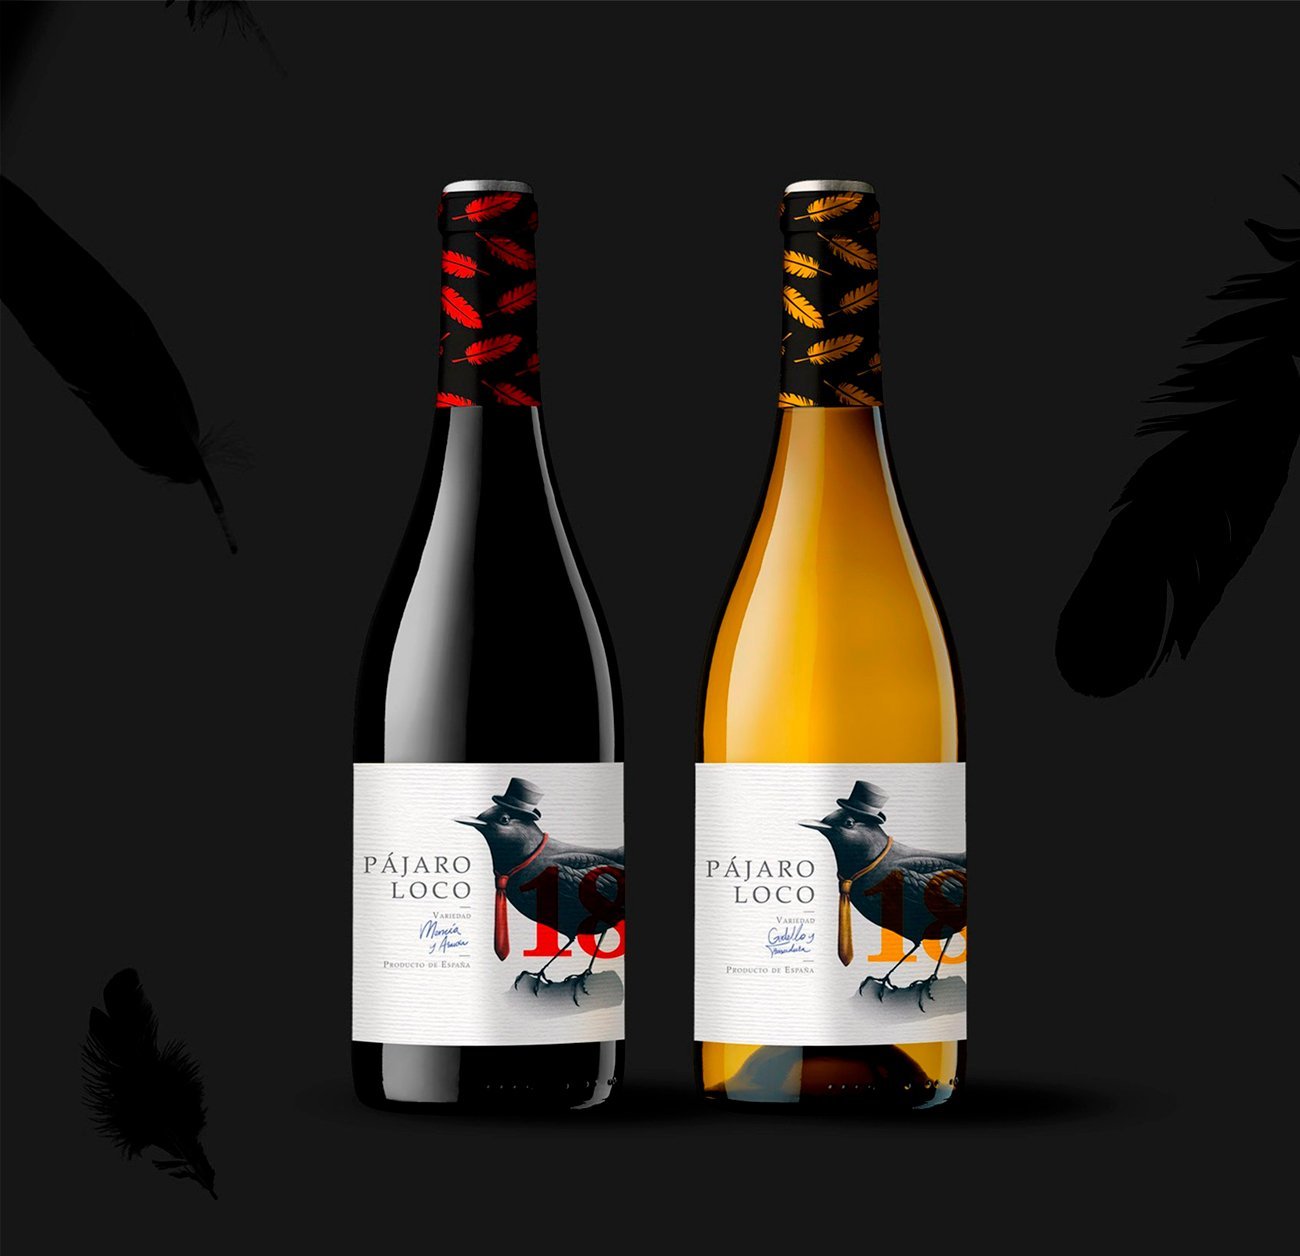 Design and Illustration for Pajara loco wine by Sr.Reny